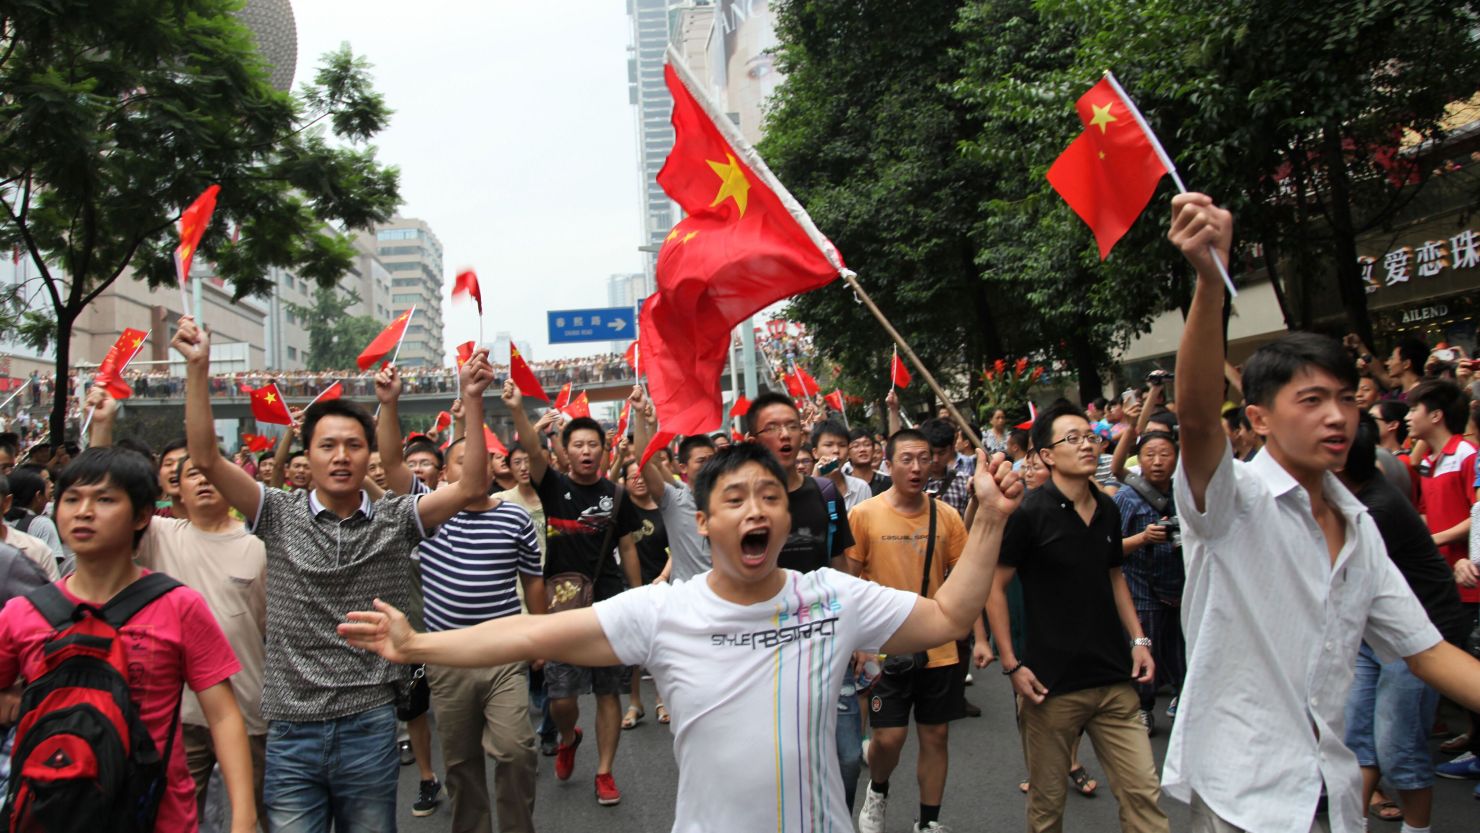 Anti-Japanese protests erupted across many Chinese cities earlier this month.